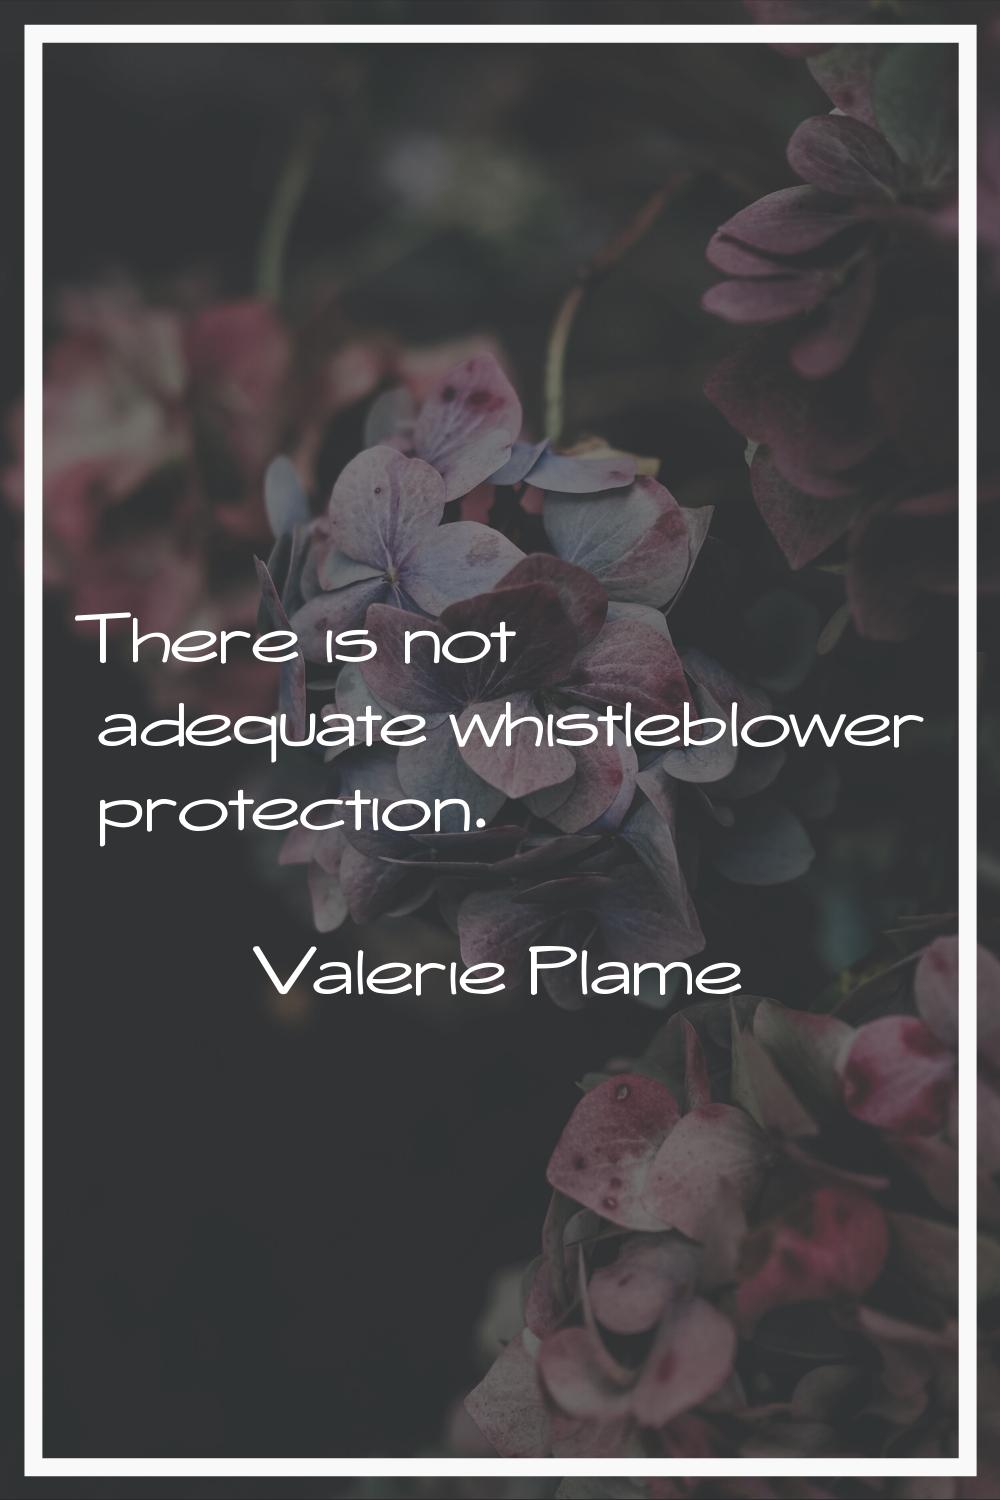 There is not adequate whistleblower protection.